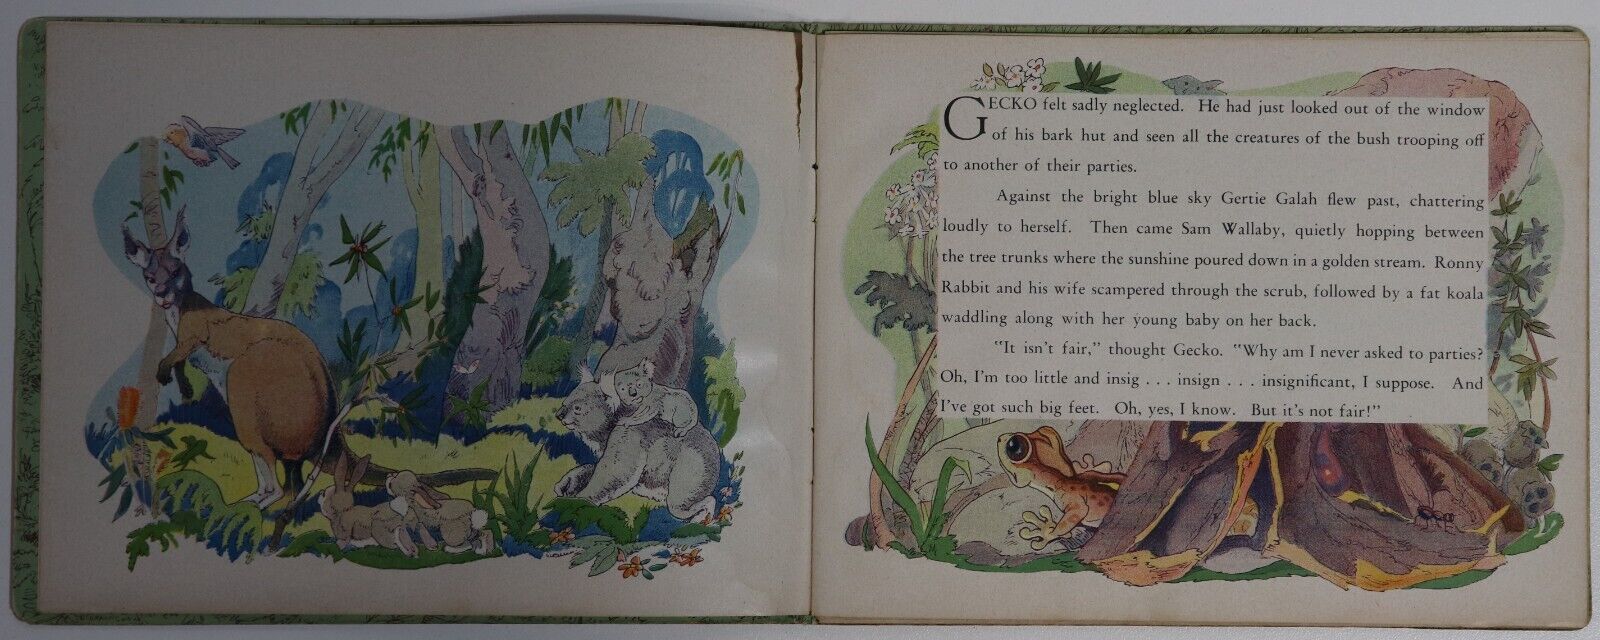 Gecko: The Lizard Who Lost His Tail - 1944 - Antique Children's Book